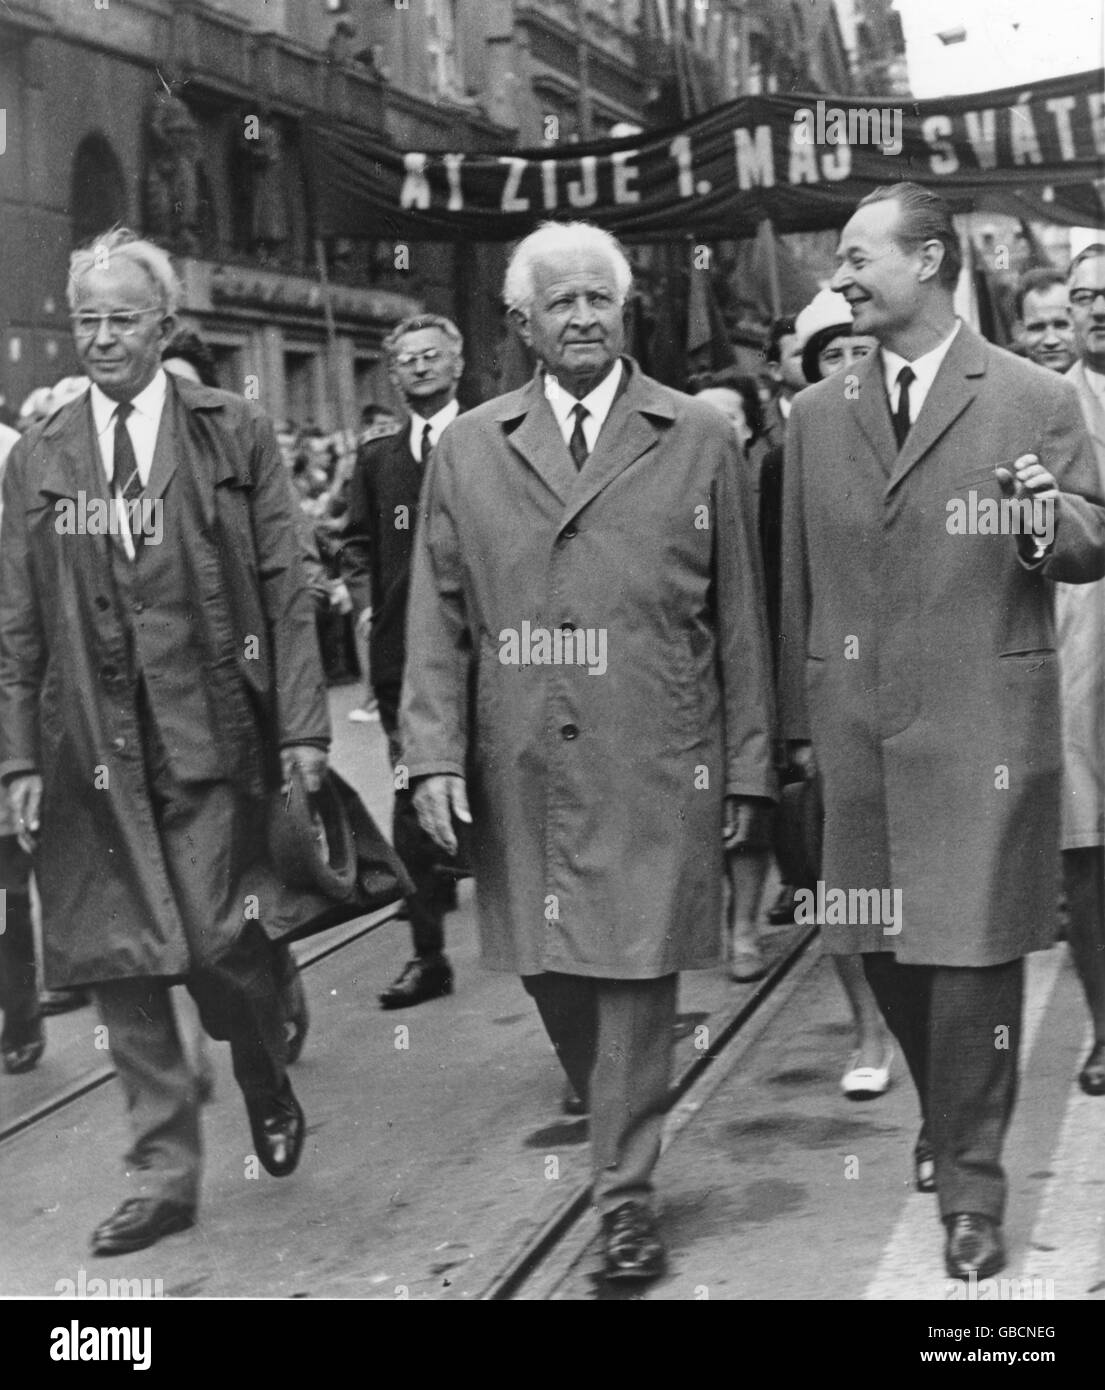 Czech Communist Party Leader Alexander Dubcek (right), smiles as he marches with President Ludvik Svoboda (center) and Party chief-to-be Gustav Husak in Prague's 1968 May Day Parade. Less than four months later, in August, invading Warsaw Pact troops shattered Mr. Dubcek's hopes of establishing a more liberal Czechoslovakia and led to Dubcek's replacement by Husak. Stock Photo